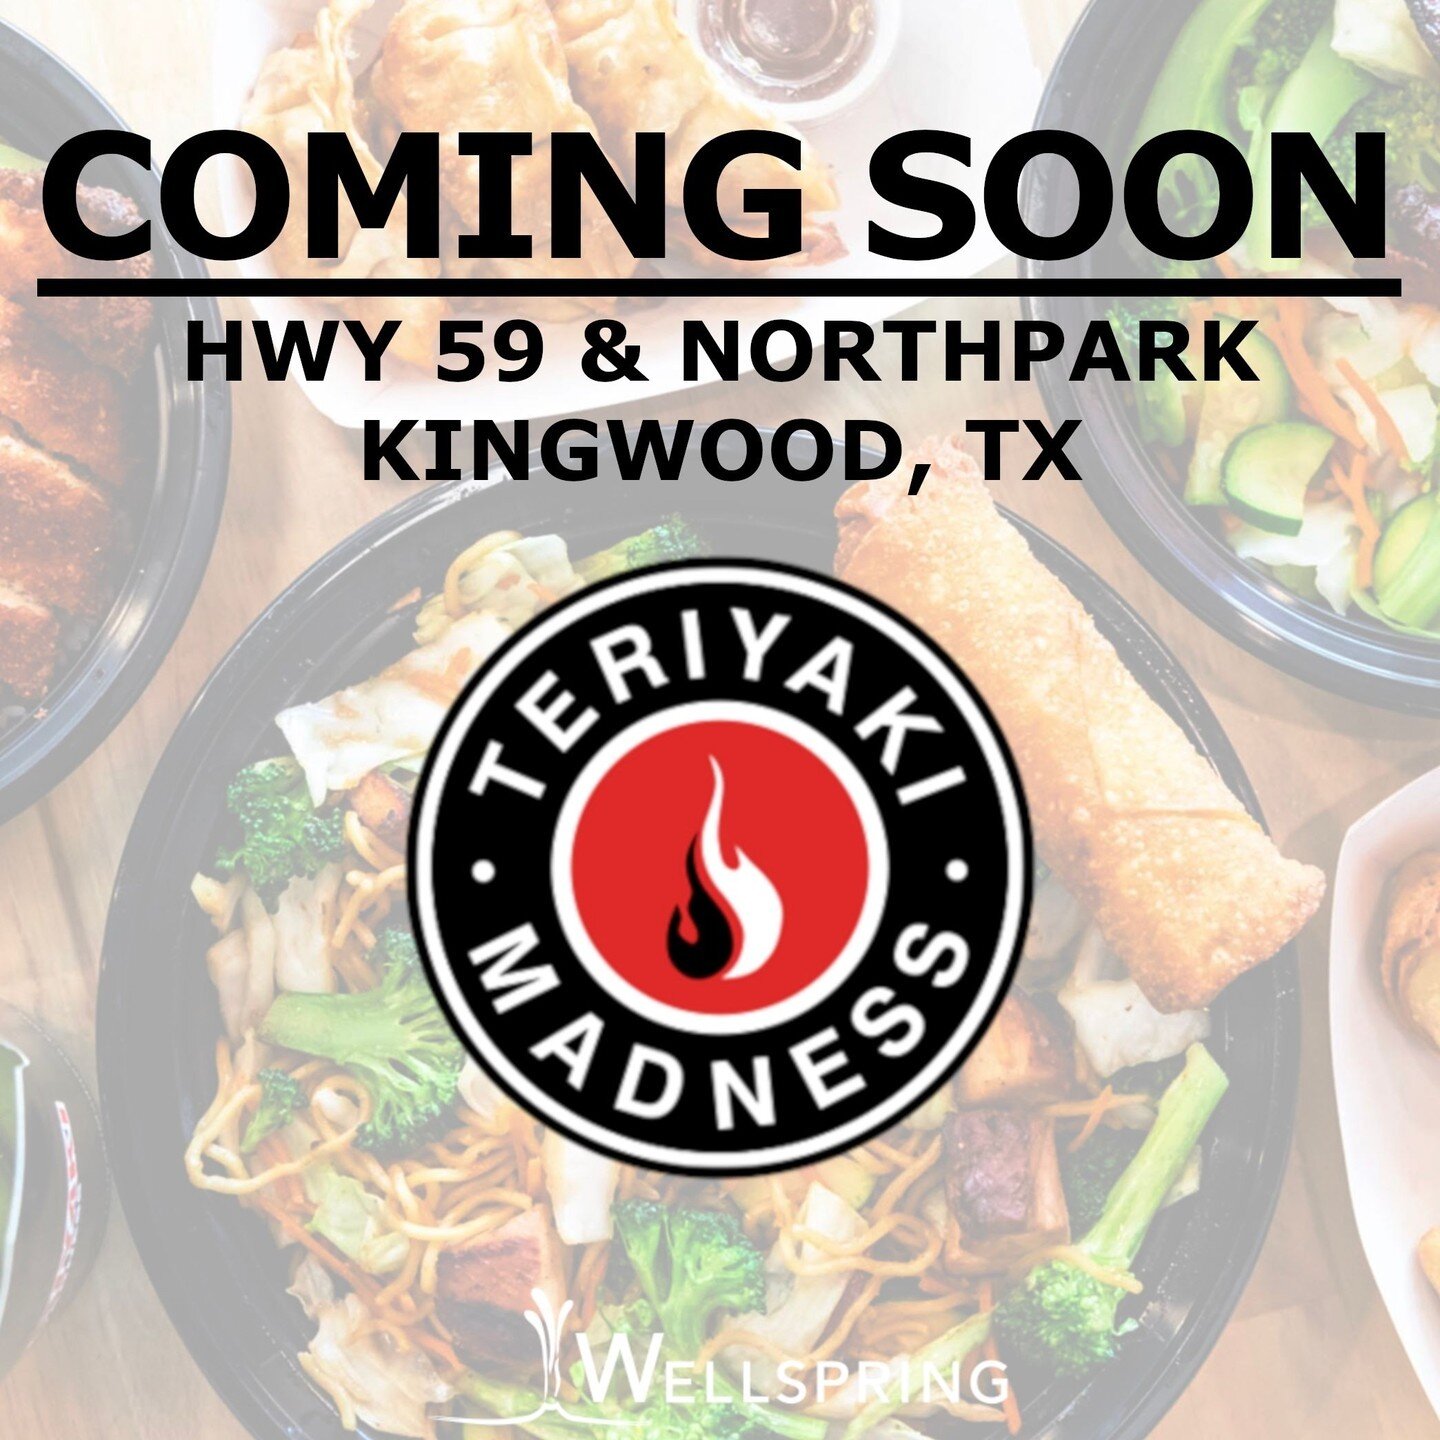 Crazy delicious, fresh Japanese-inspired Teriyaki bowls are coming soon as a dining option on the northeast side of HTX! Another great deal completed in the HEB project at Hwy 59 &amp; Northpark in Kingwood, Texas - Kingwood Place. 

Court Richardson